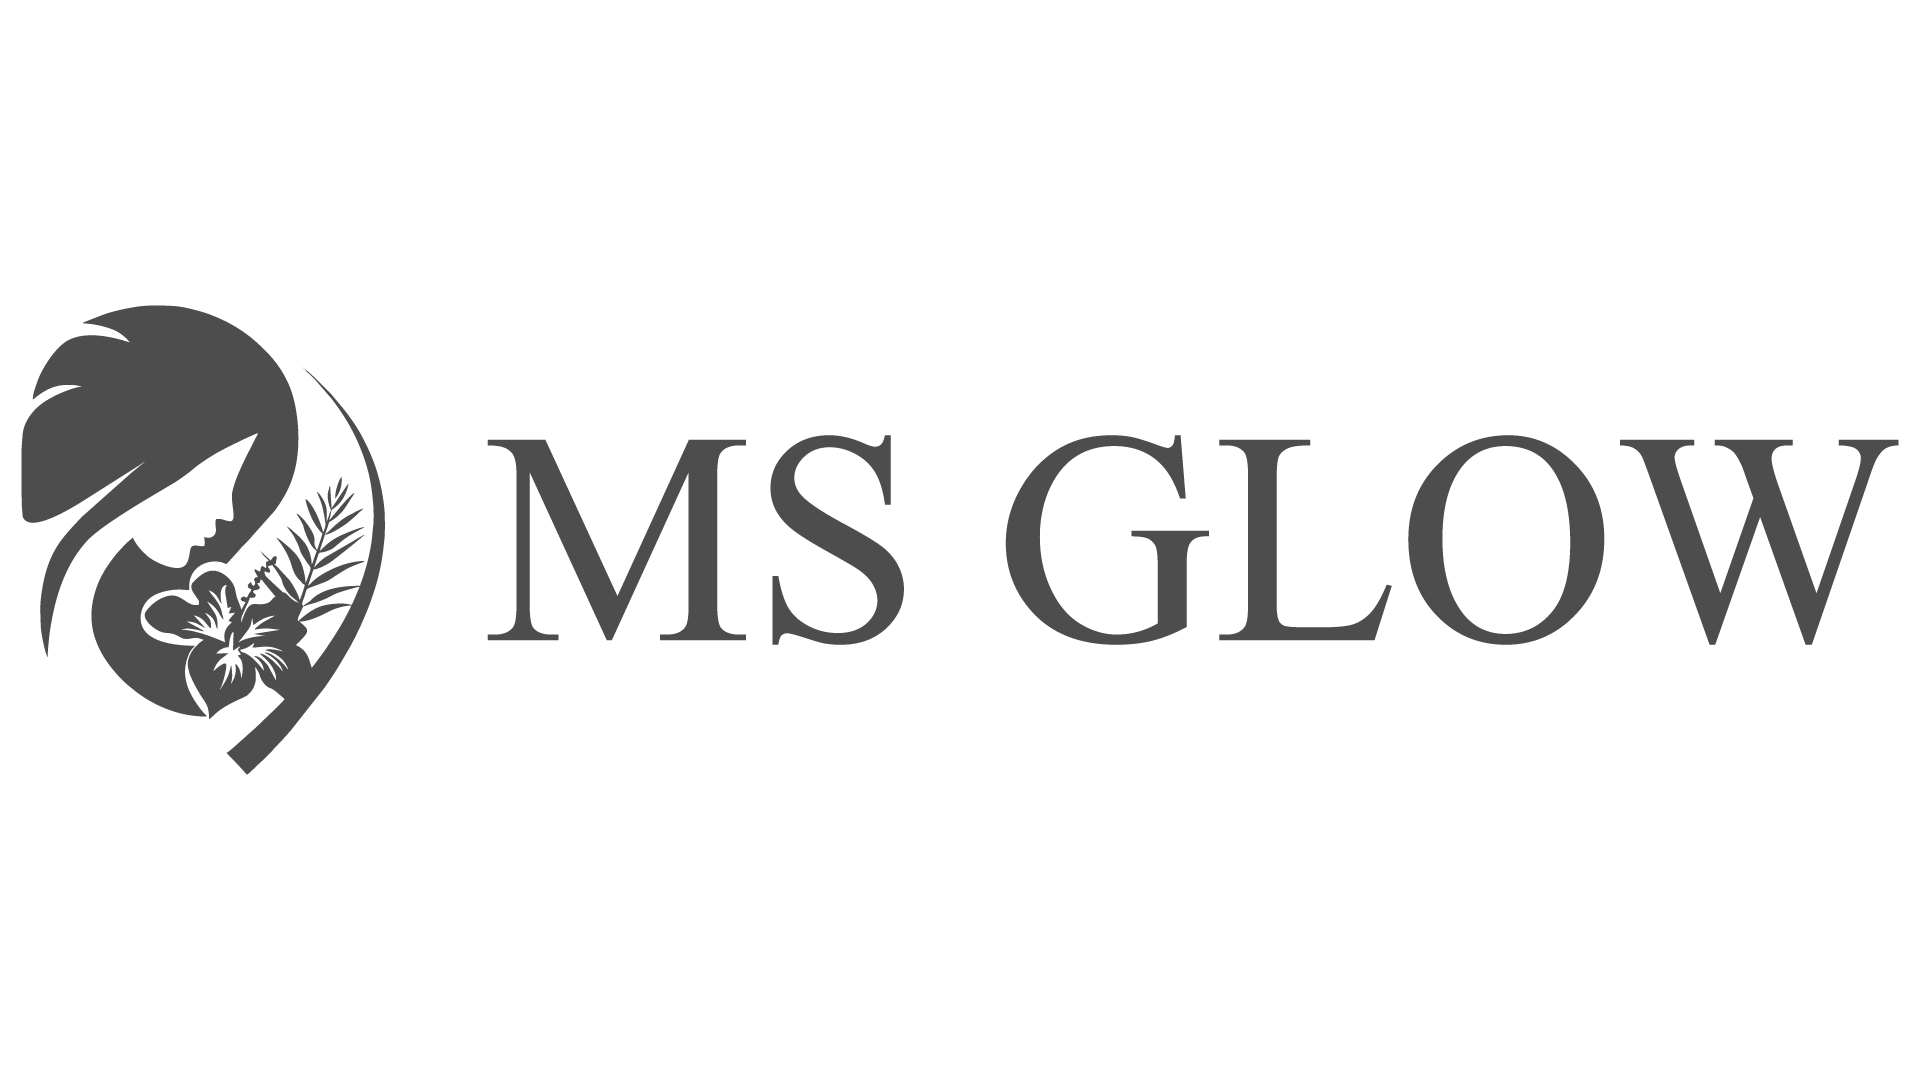 WhatsApp for beauty brand owned by MS Glow company